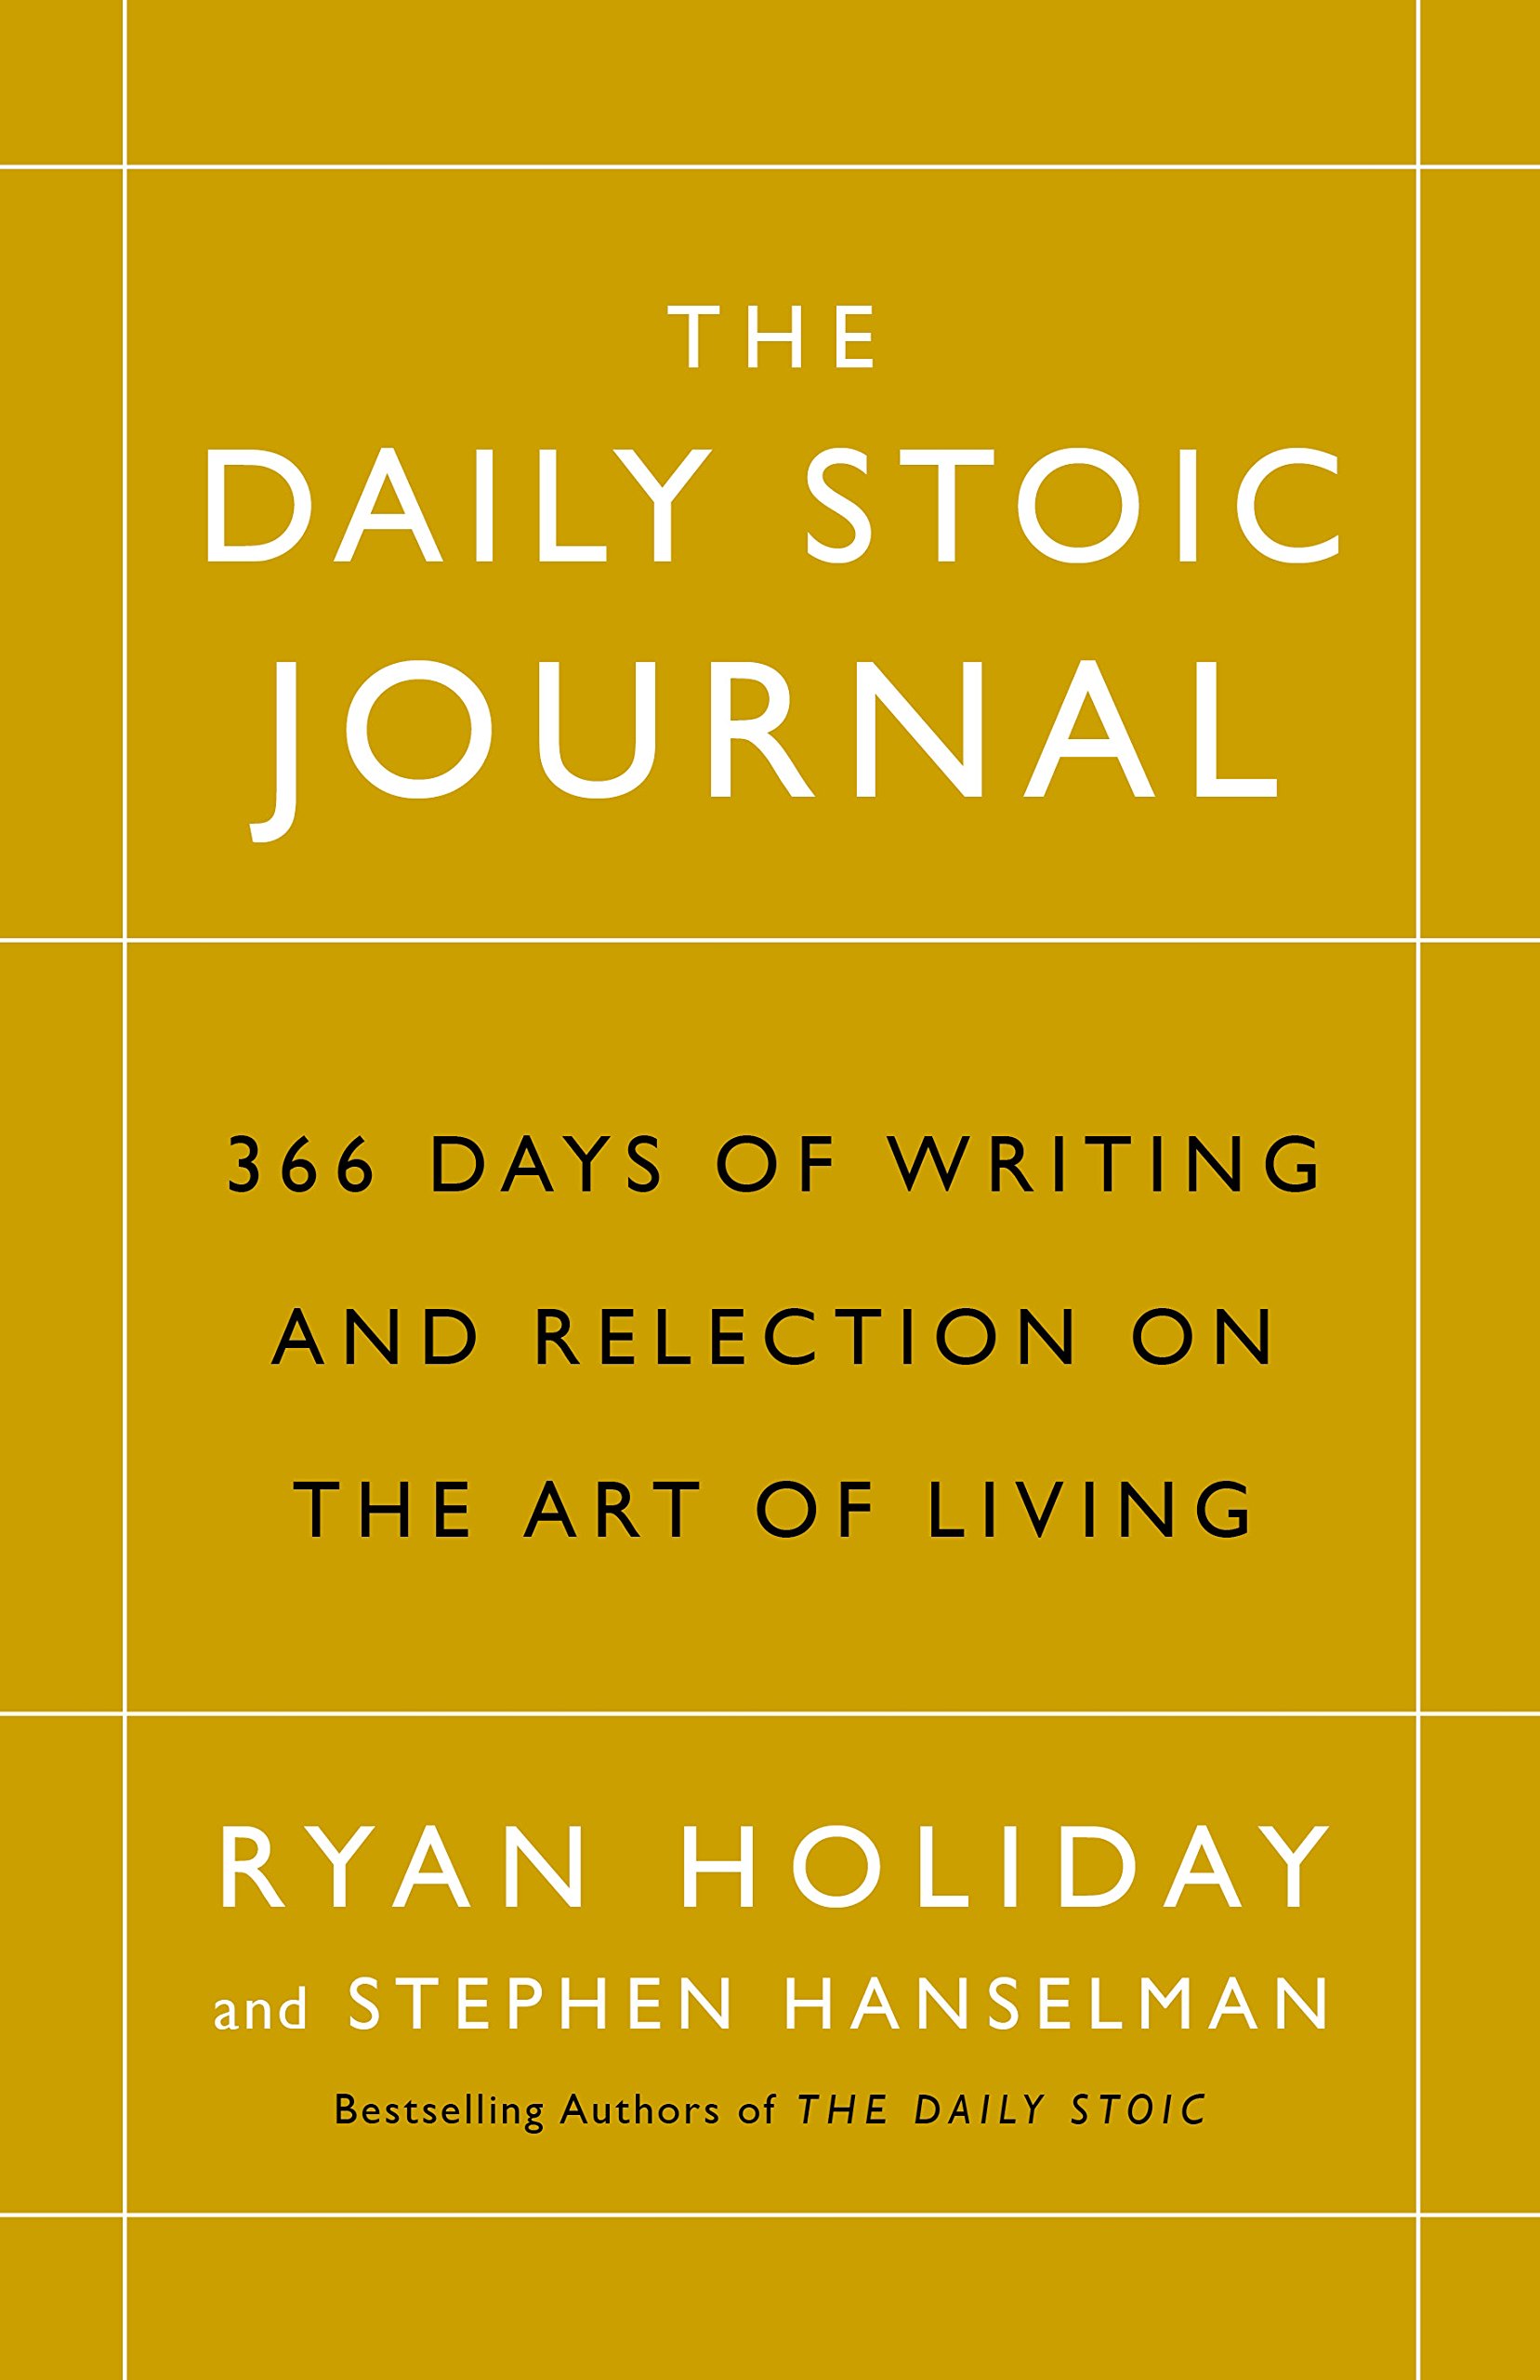 The Daily Stoic Journal: 366 Days of Writing and Reflecting on the Art of Living | Profile Books Ltd